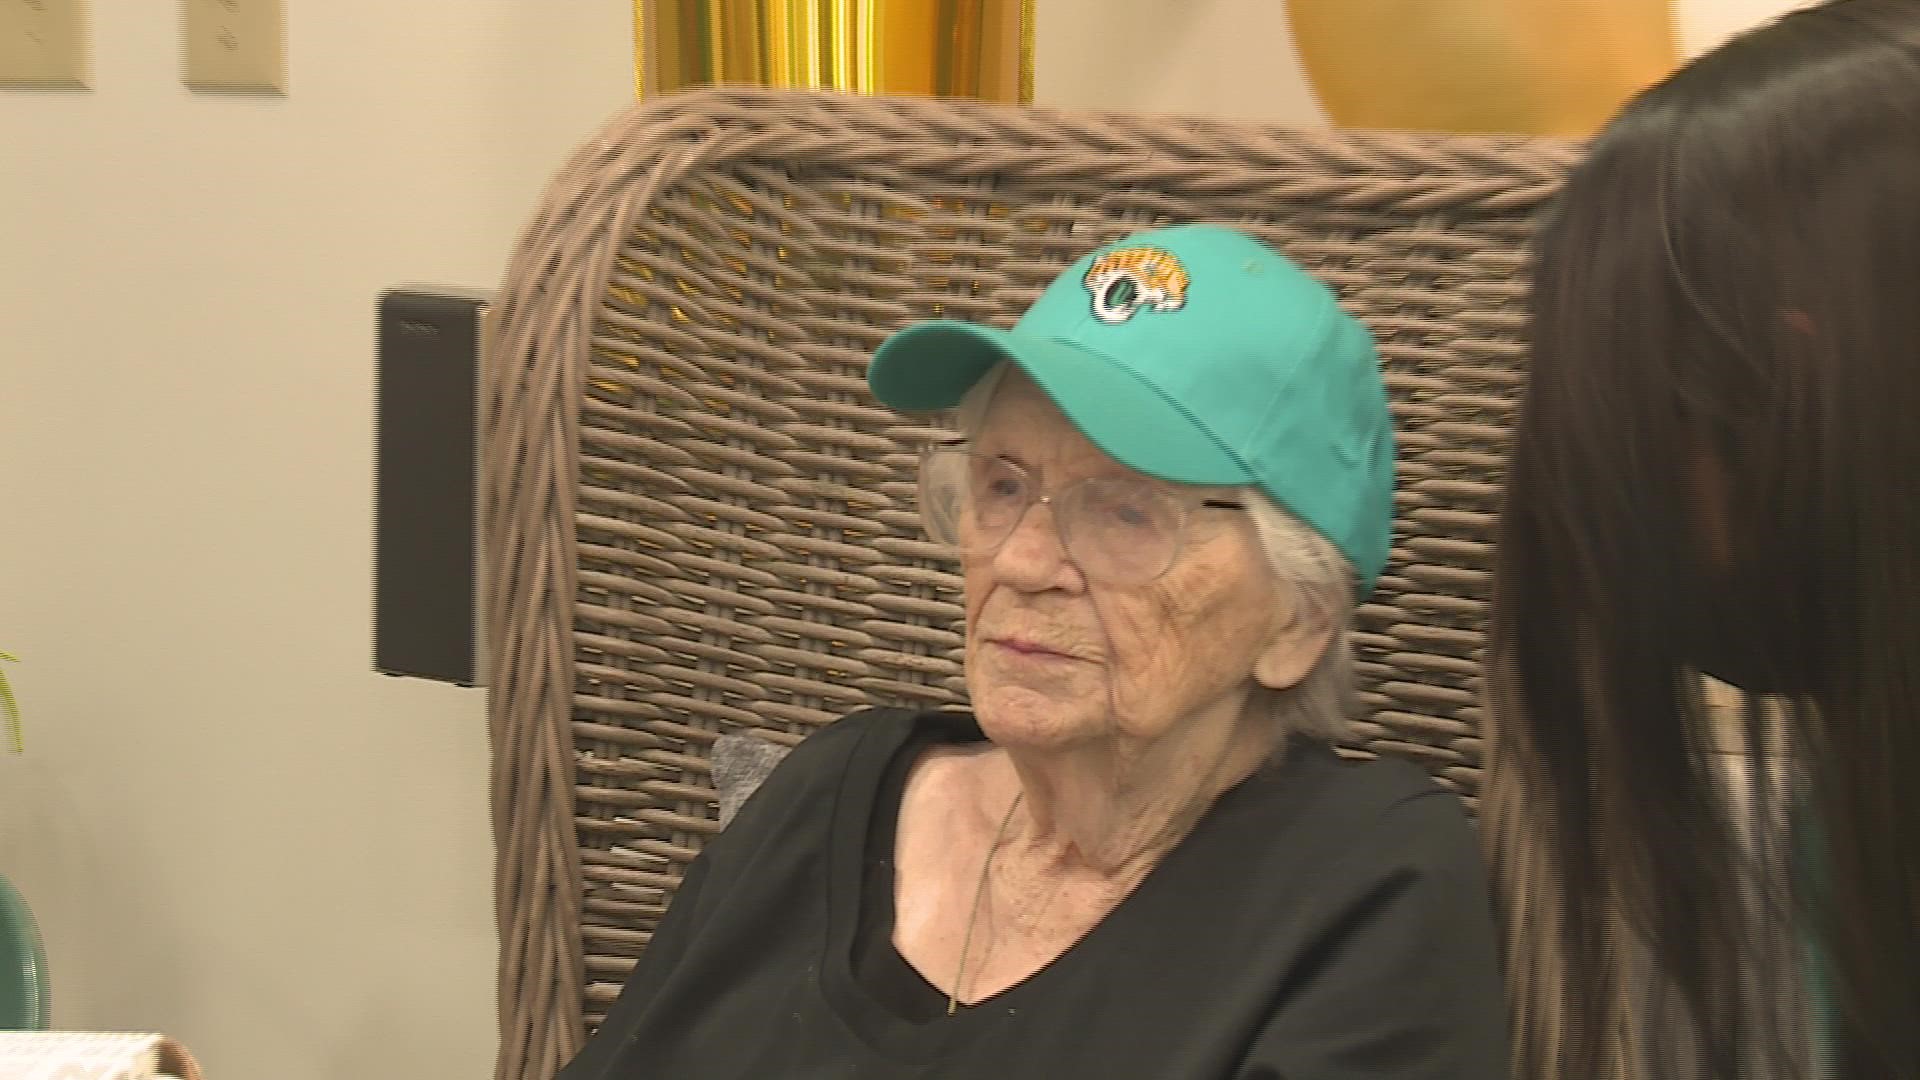 She's been a huge Jags fan since that time, and says she's particularly fond of the team’s quarterback.